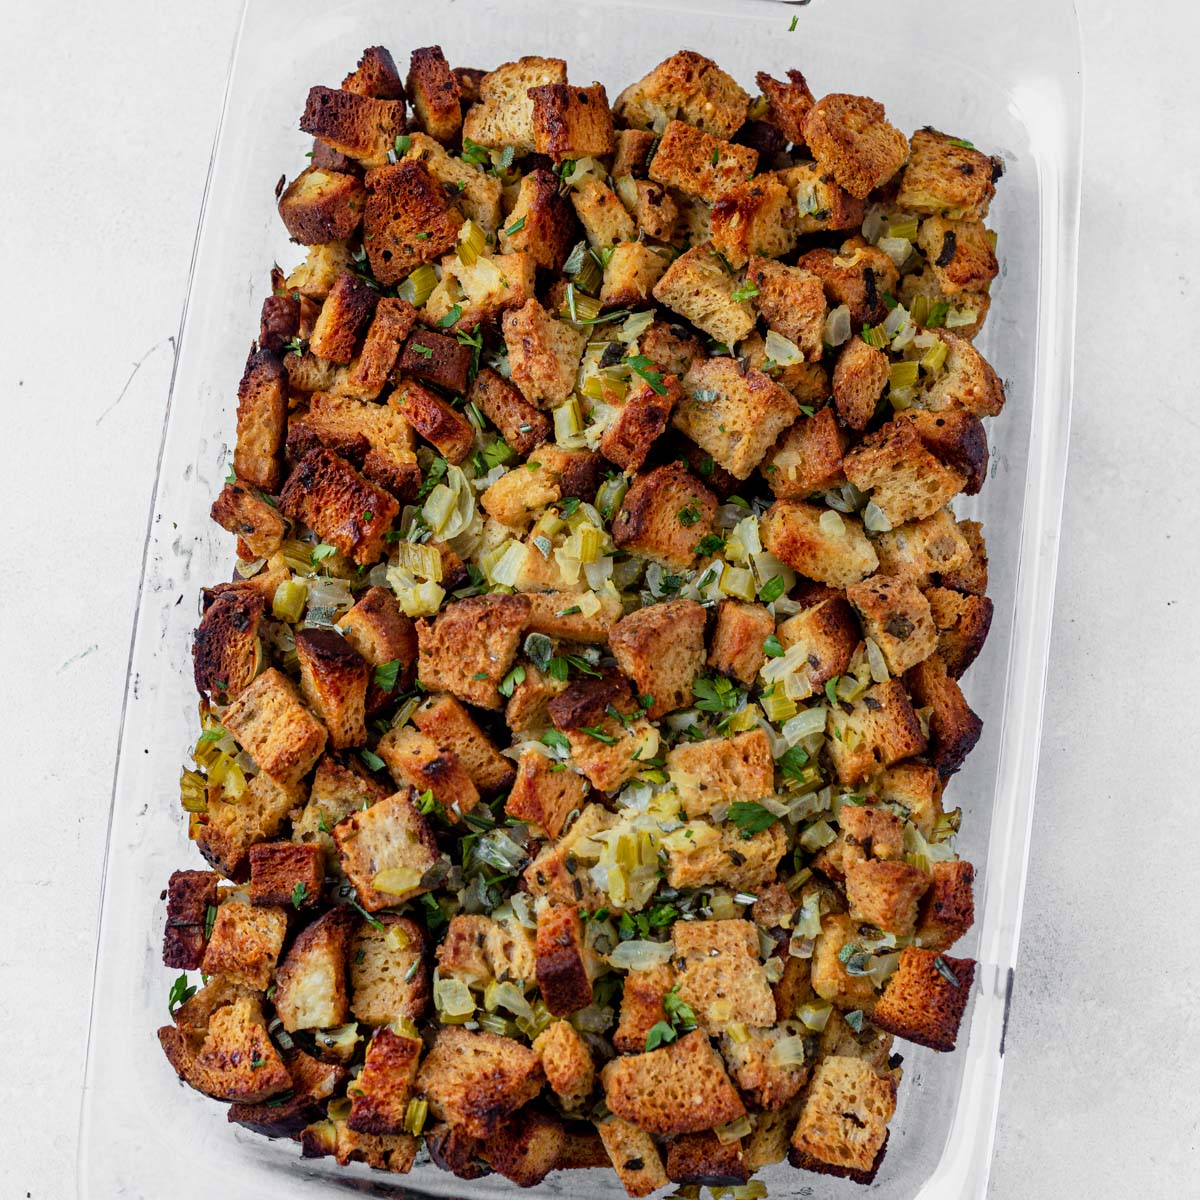 Best Stuffing Recipe - Our Favorite Buttery Herb Stuffing